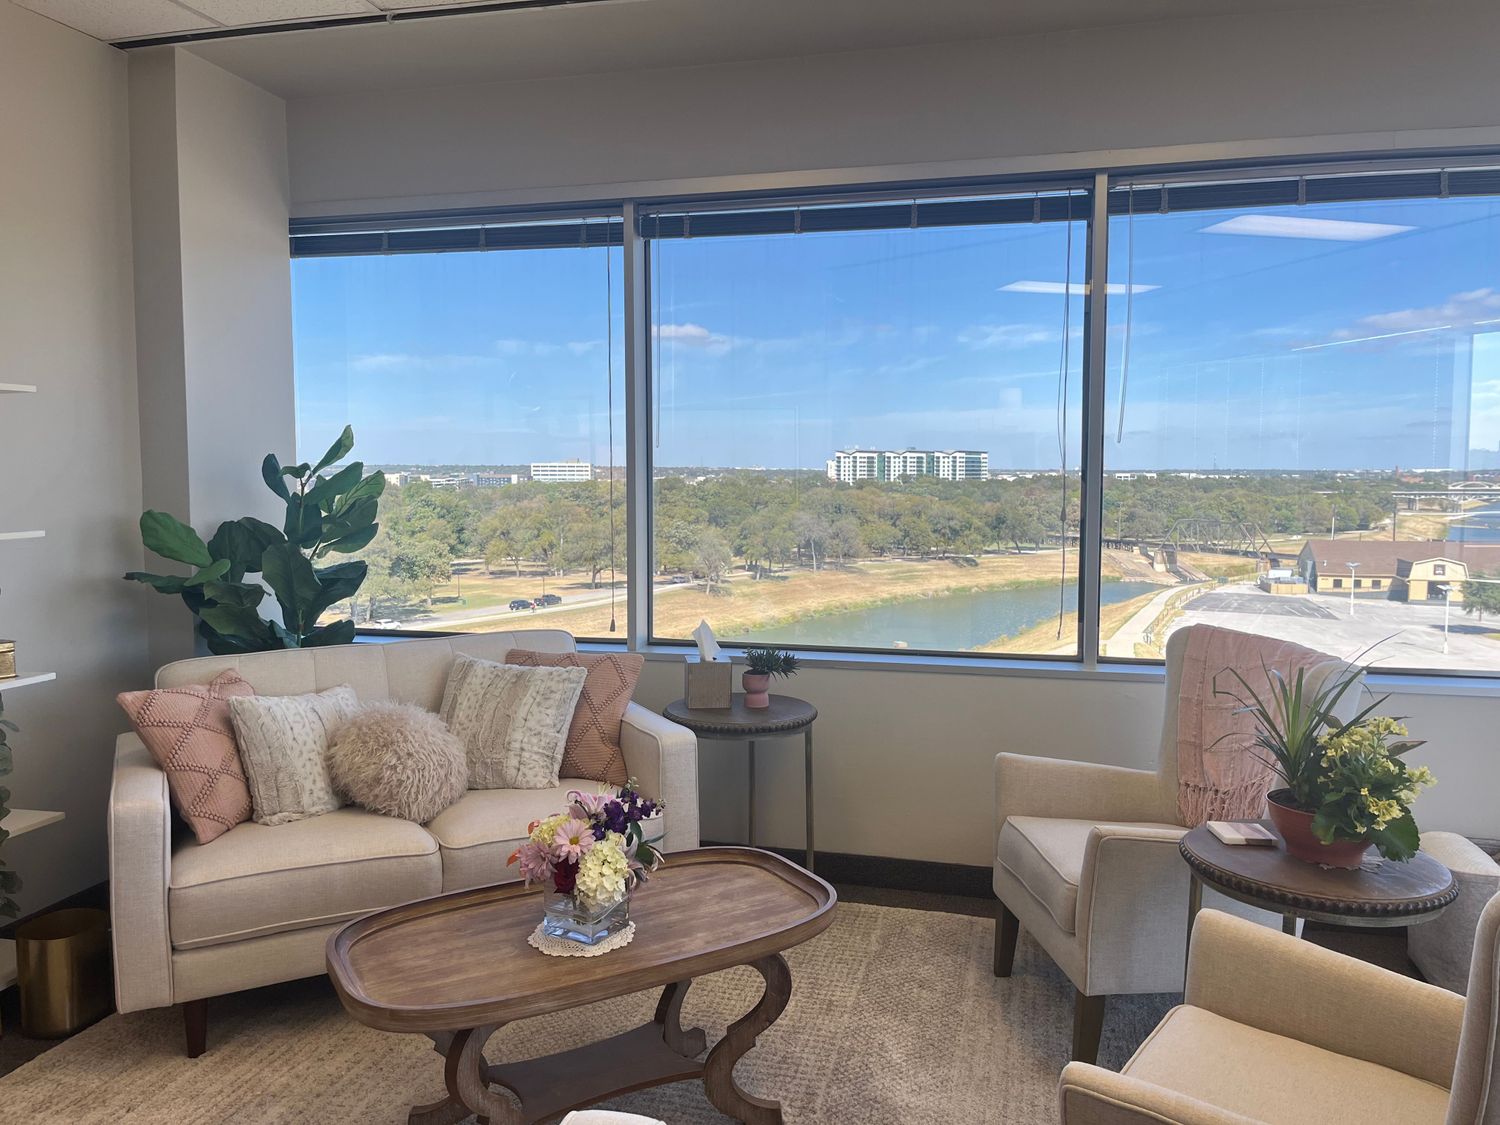 Gallery Photo of Beautiful views of the Trinity River from the 6th floor of the Park Plaza office building